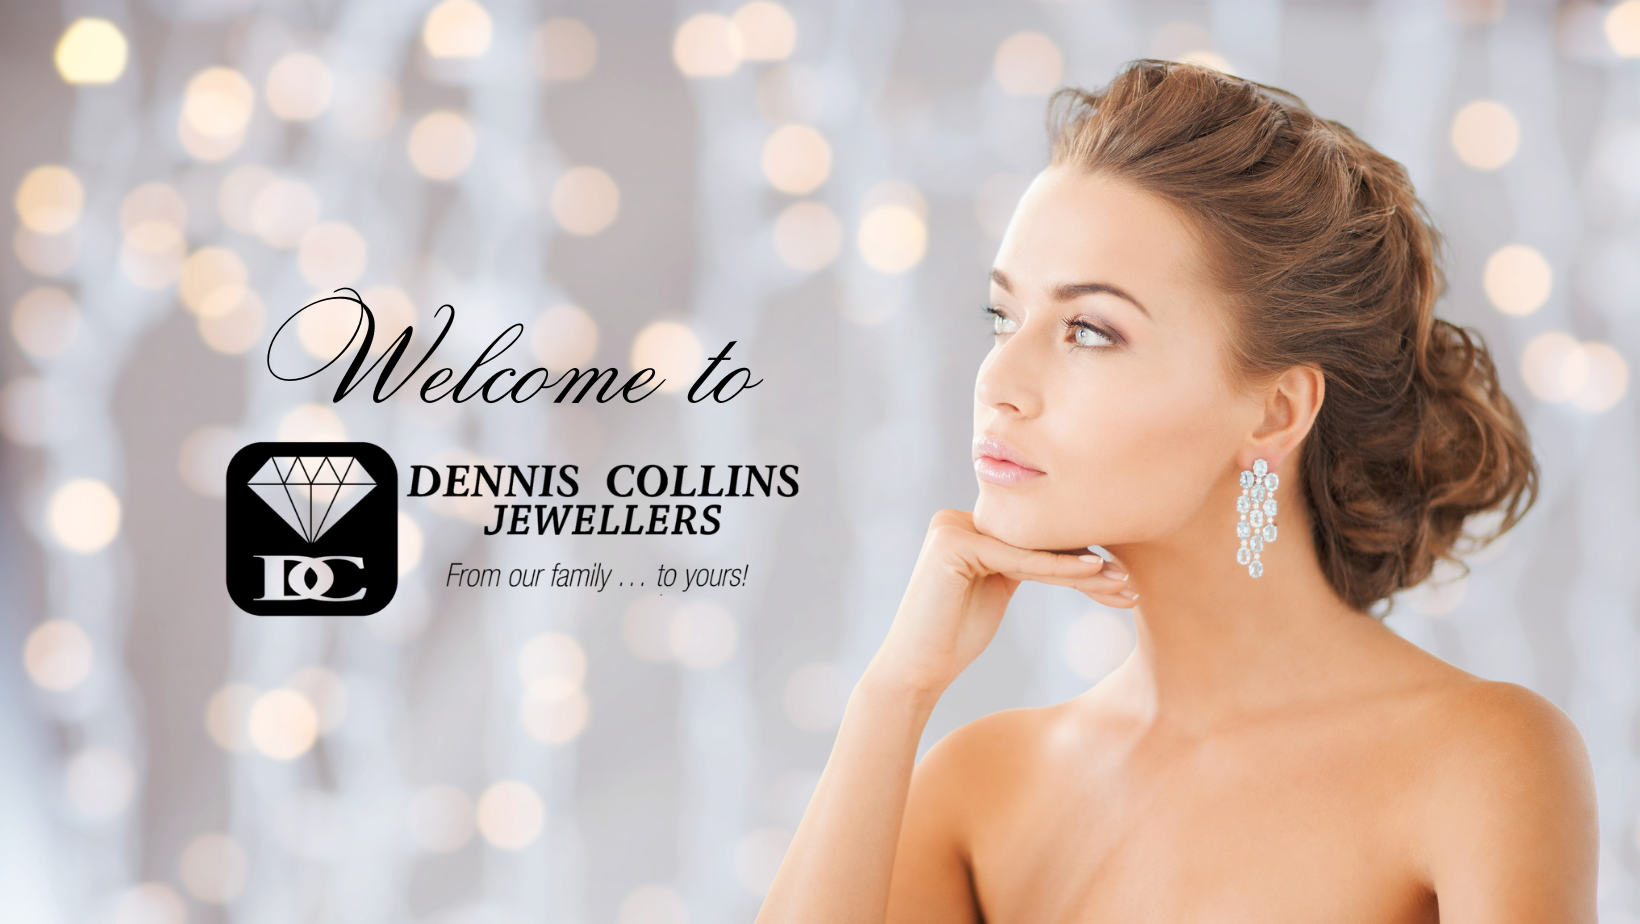 Welcome to Dennis Collins Jewellers. Discover our exclusive collection with a beautiful and elegant lady wearing exquisite white gold and diamond earrings. Explore timeless jewelry for every occasion.